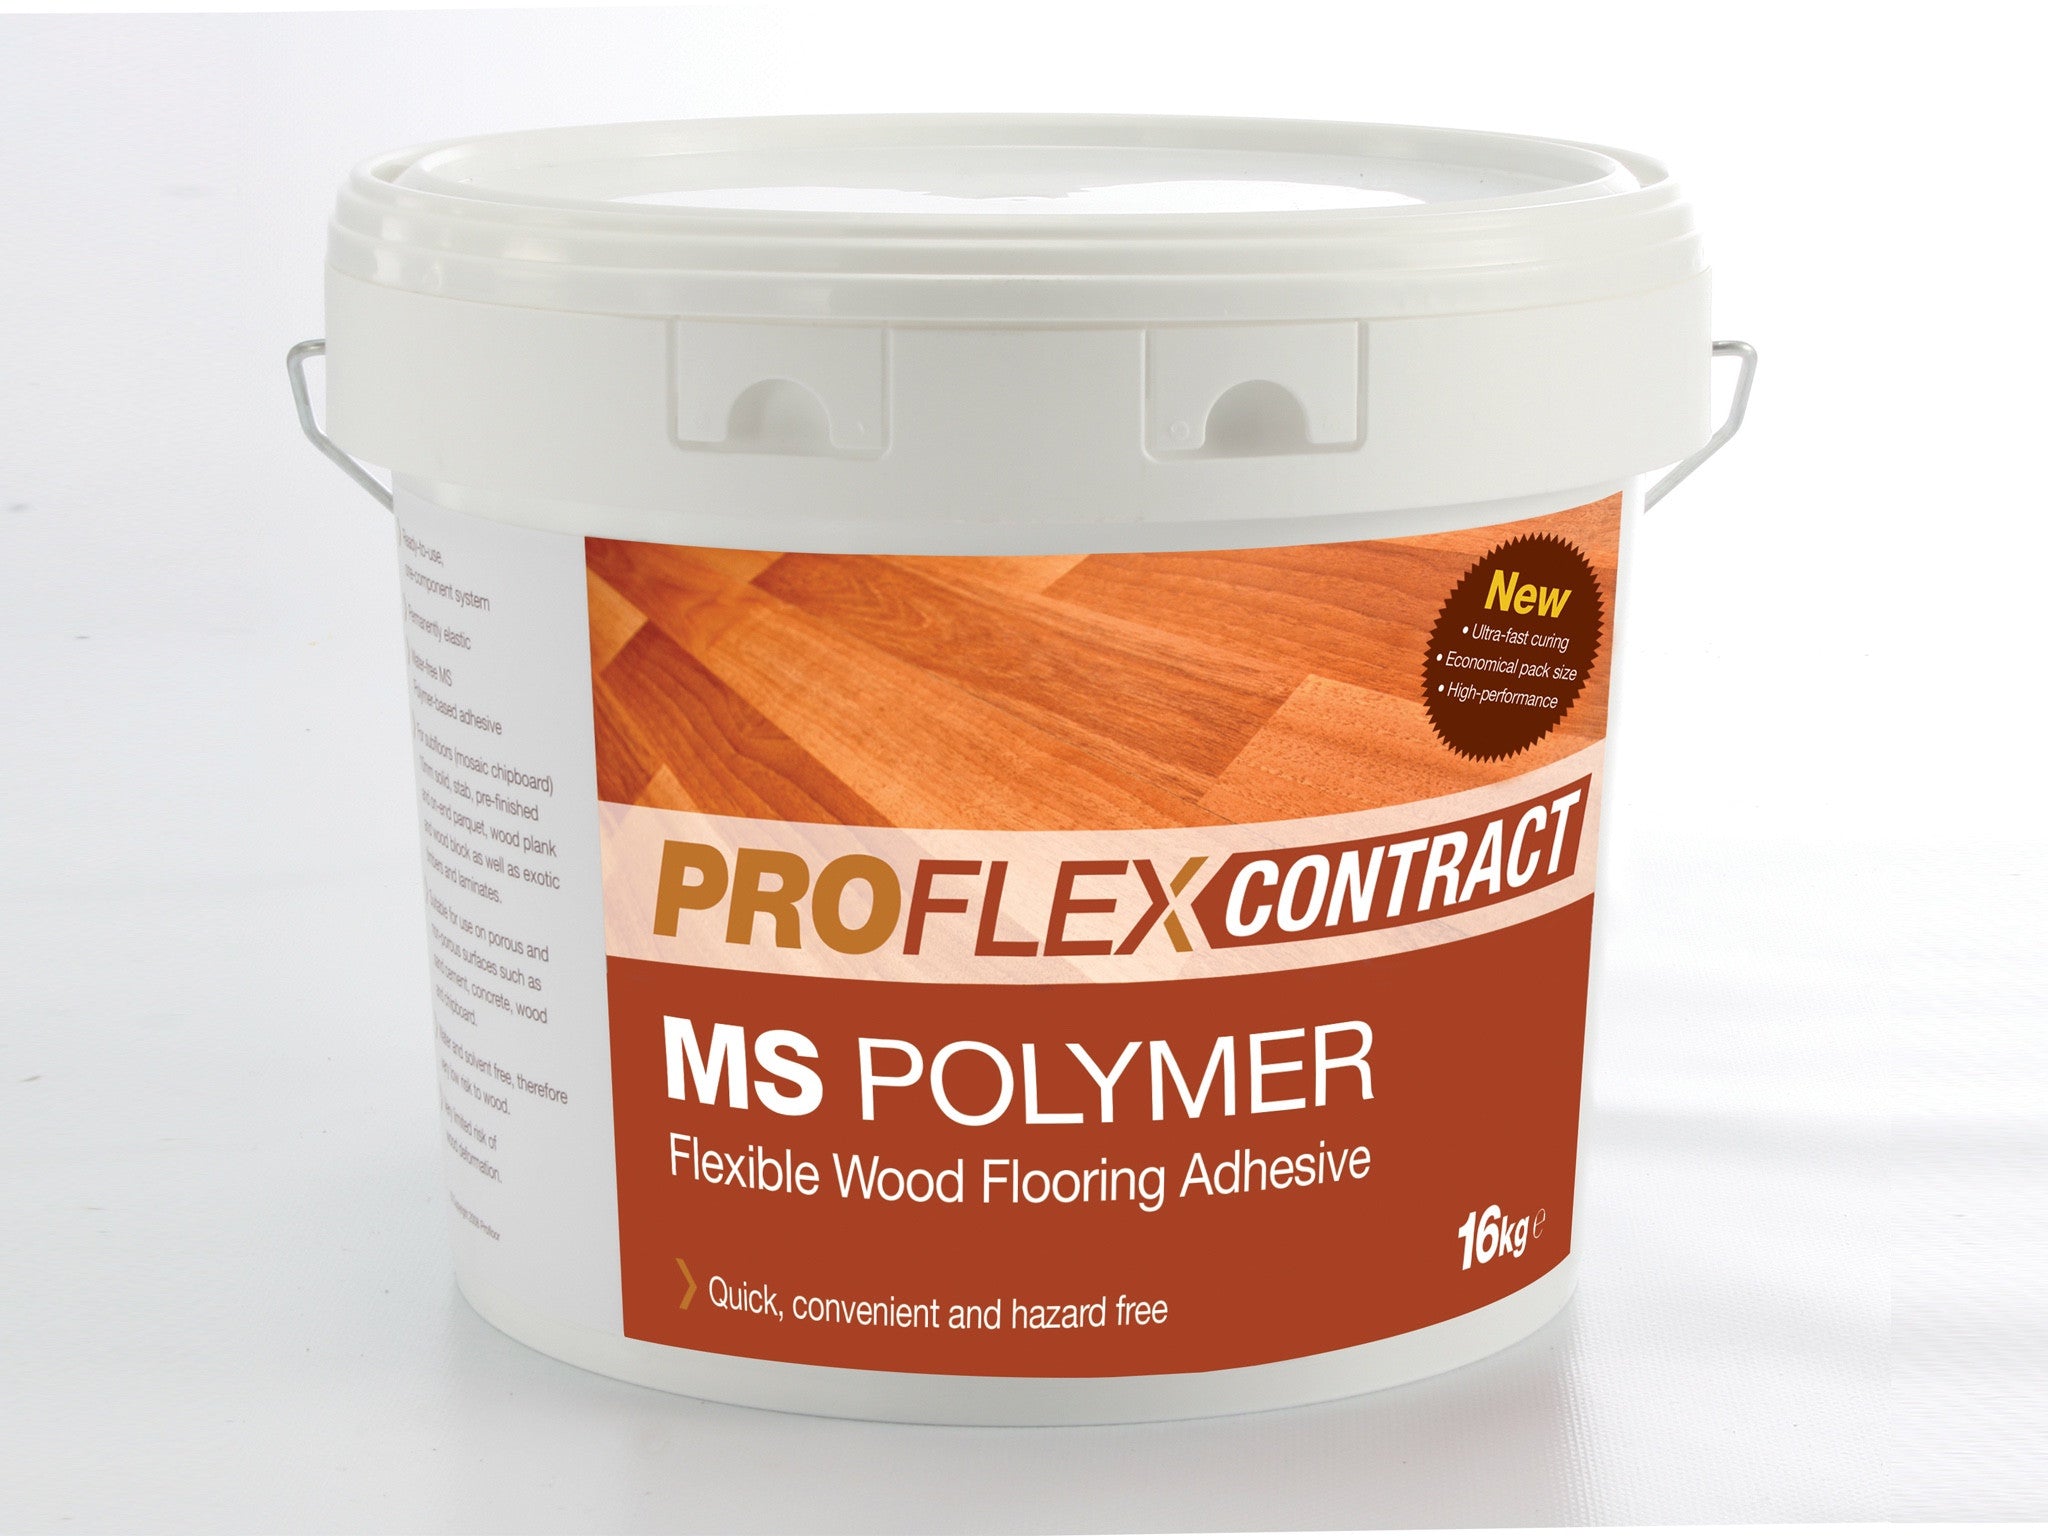 4 x Proflex Contract MS Polymer 16Kg